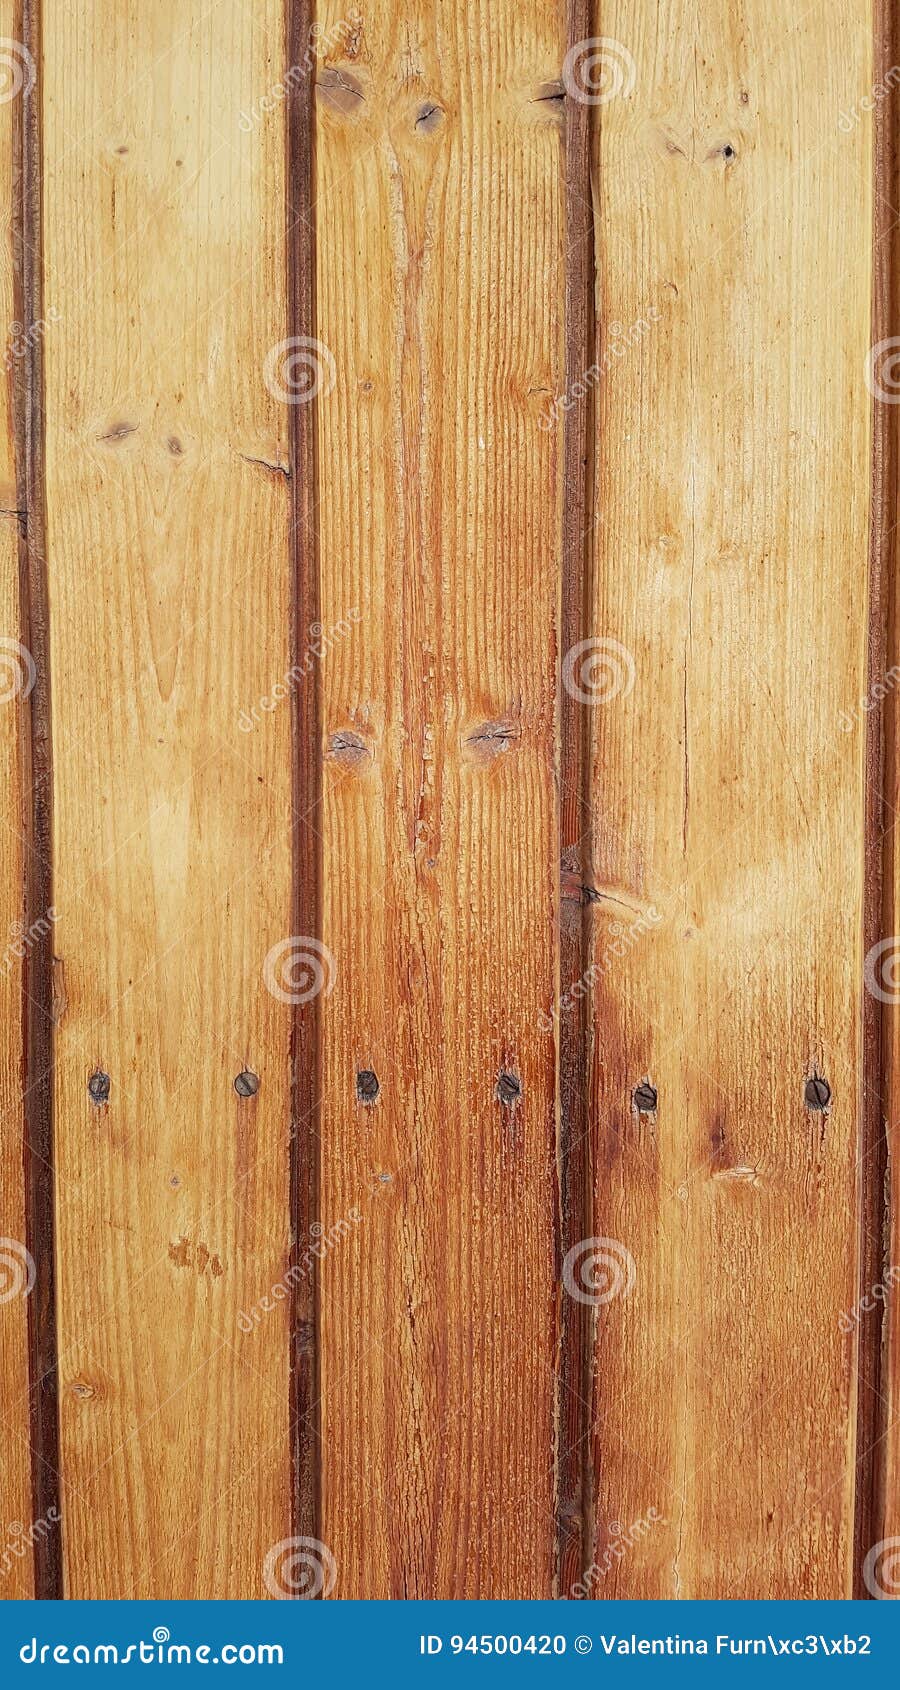 wooden panel with rusty nails - texture